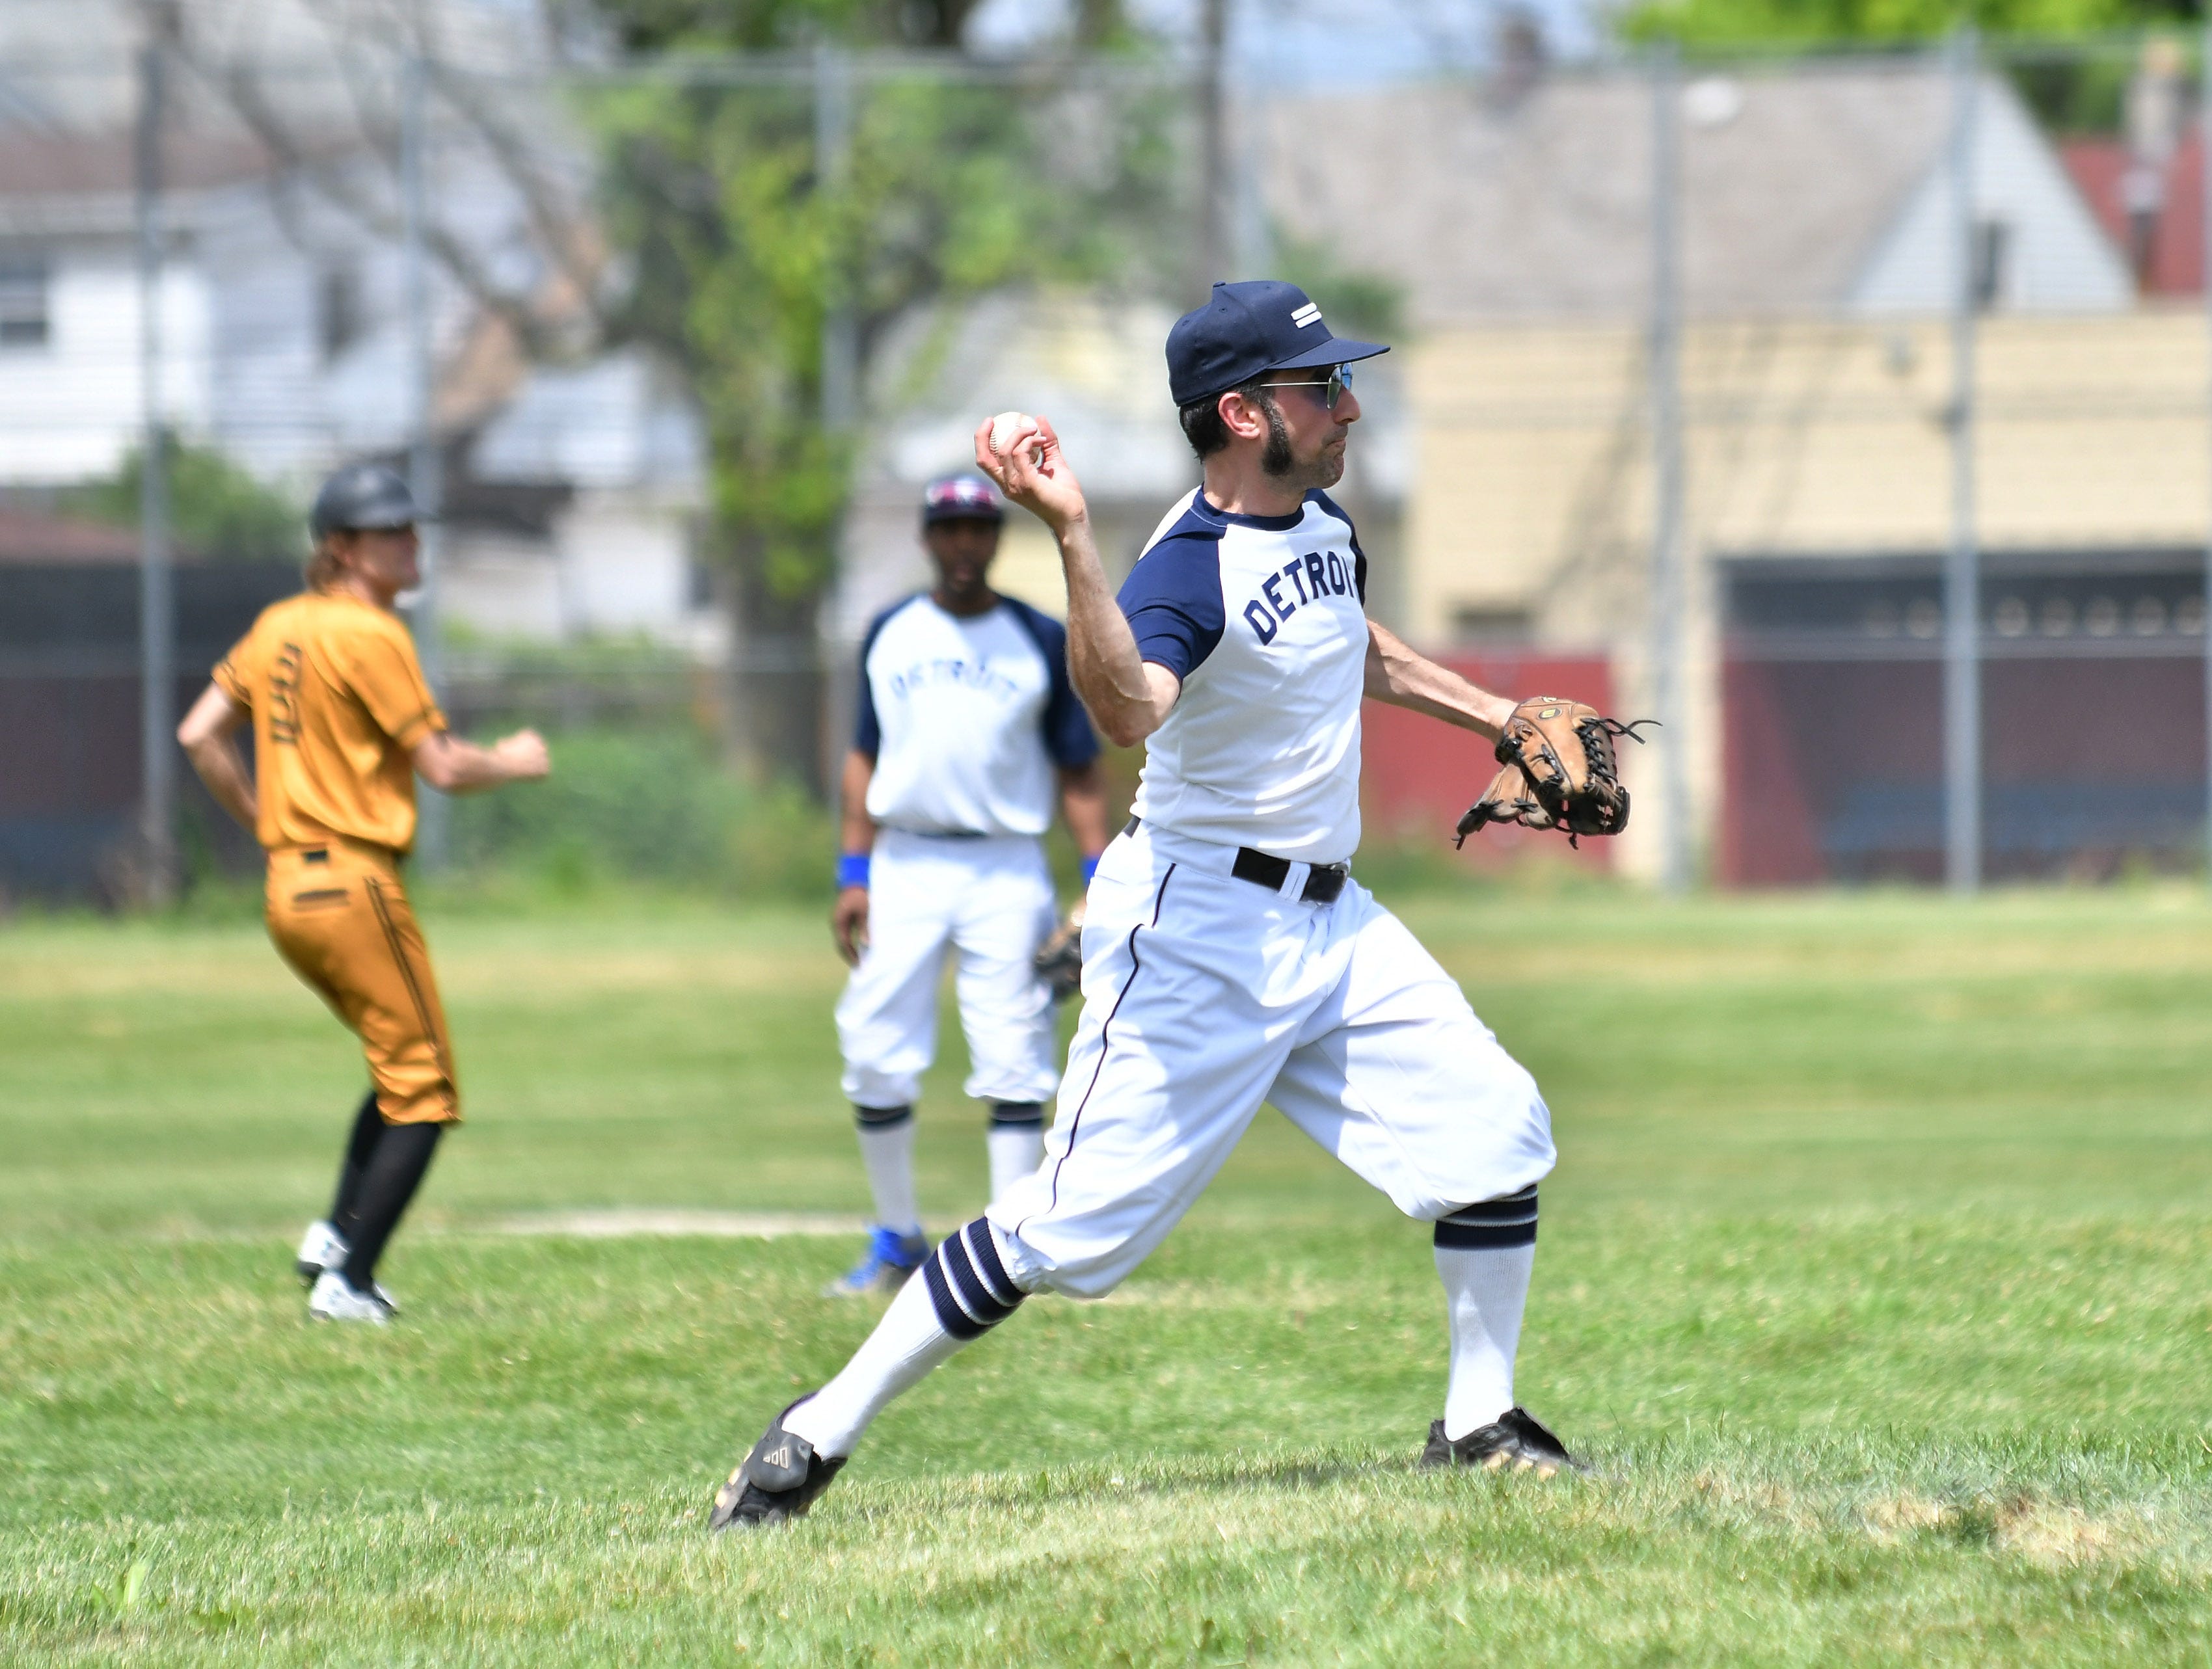 Event organizer Dave Mesrey with the Friends of Historic Hamtramck Stadium makes a throw to first base.